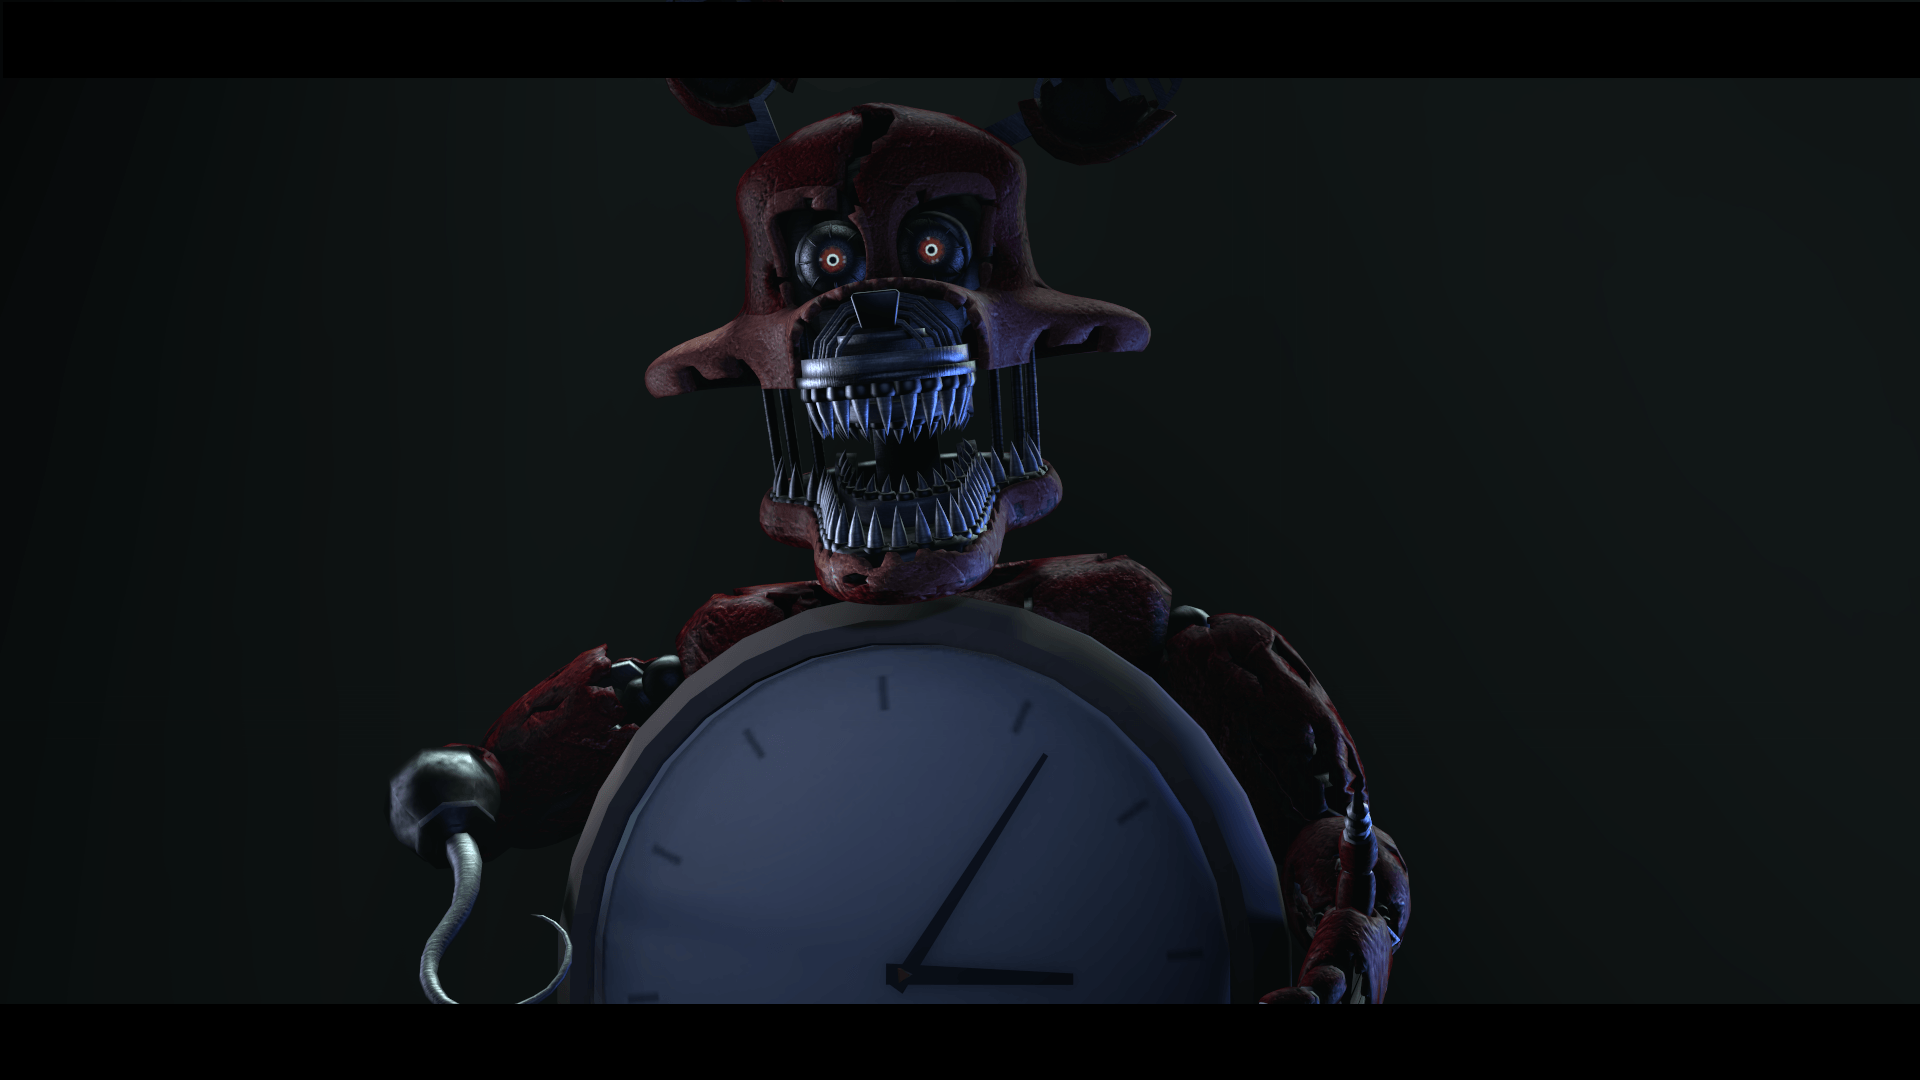 FNaF SFM Nightmare Foxy Thinks IT'S TIME TO STOP